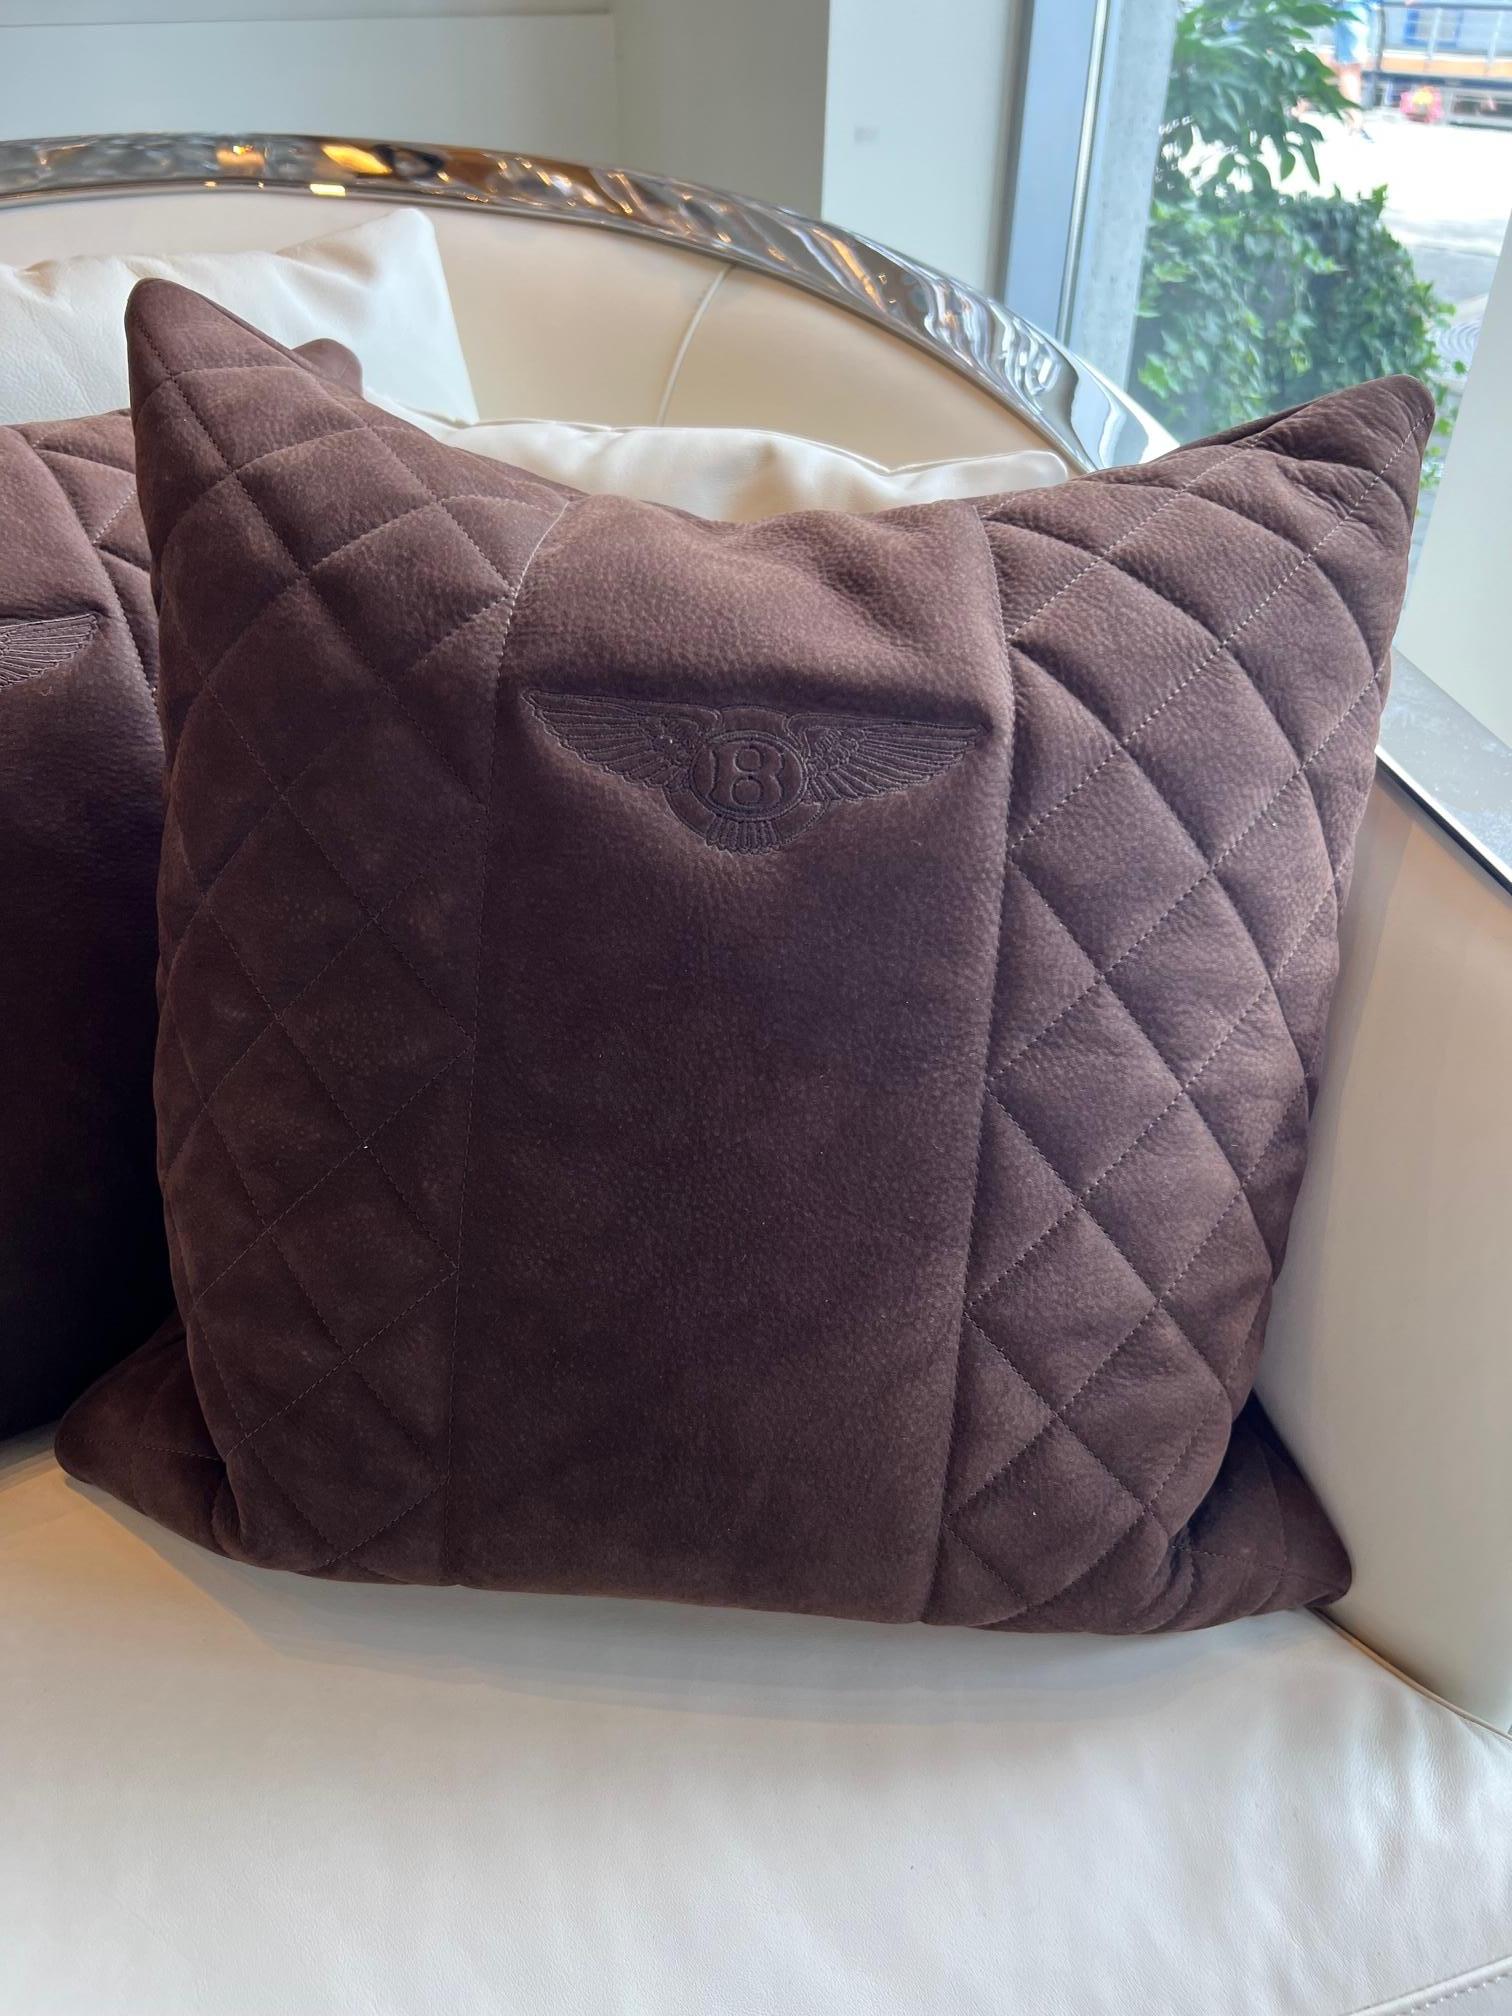 Beautifully embroidered logo Bentley Home chocolate brown suede nubuk leather quilted  cushions, sold as pair